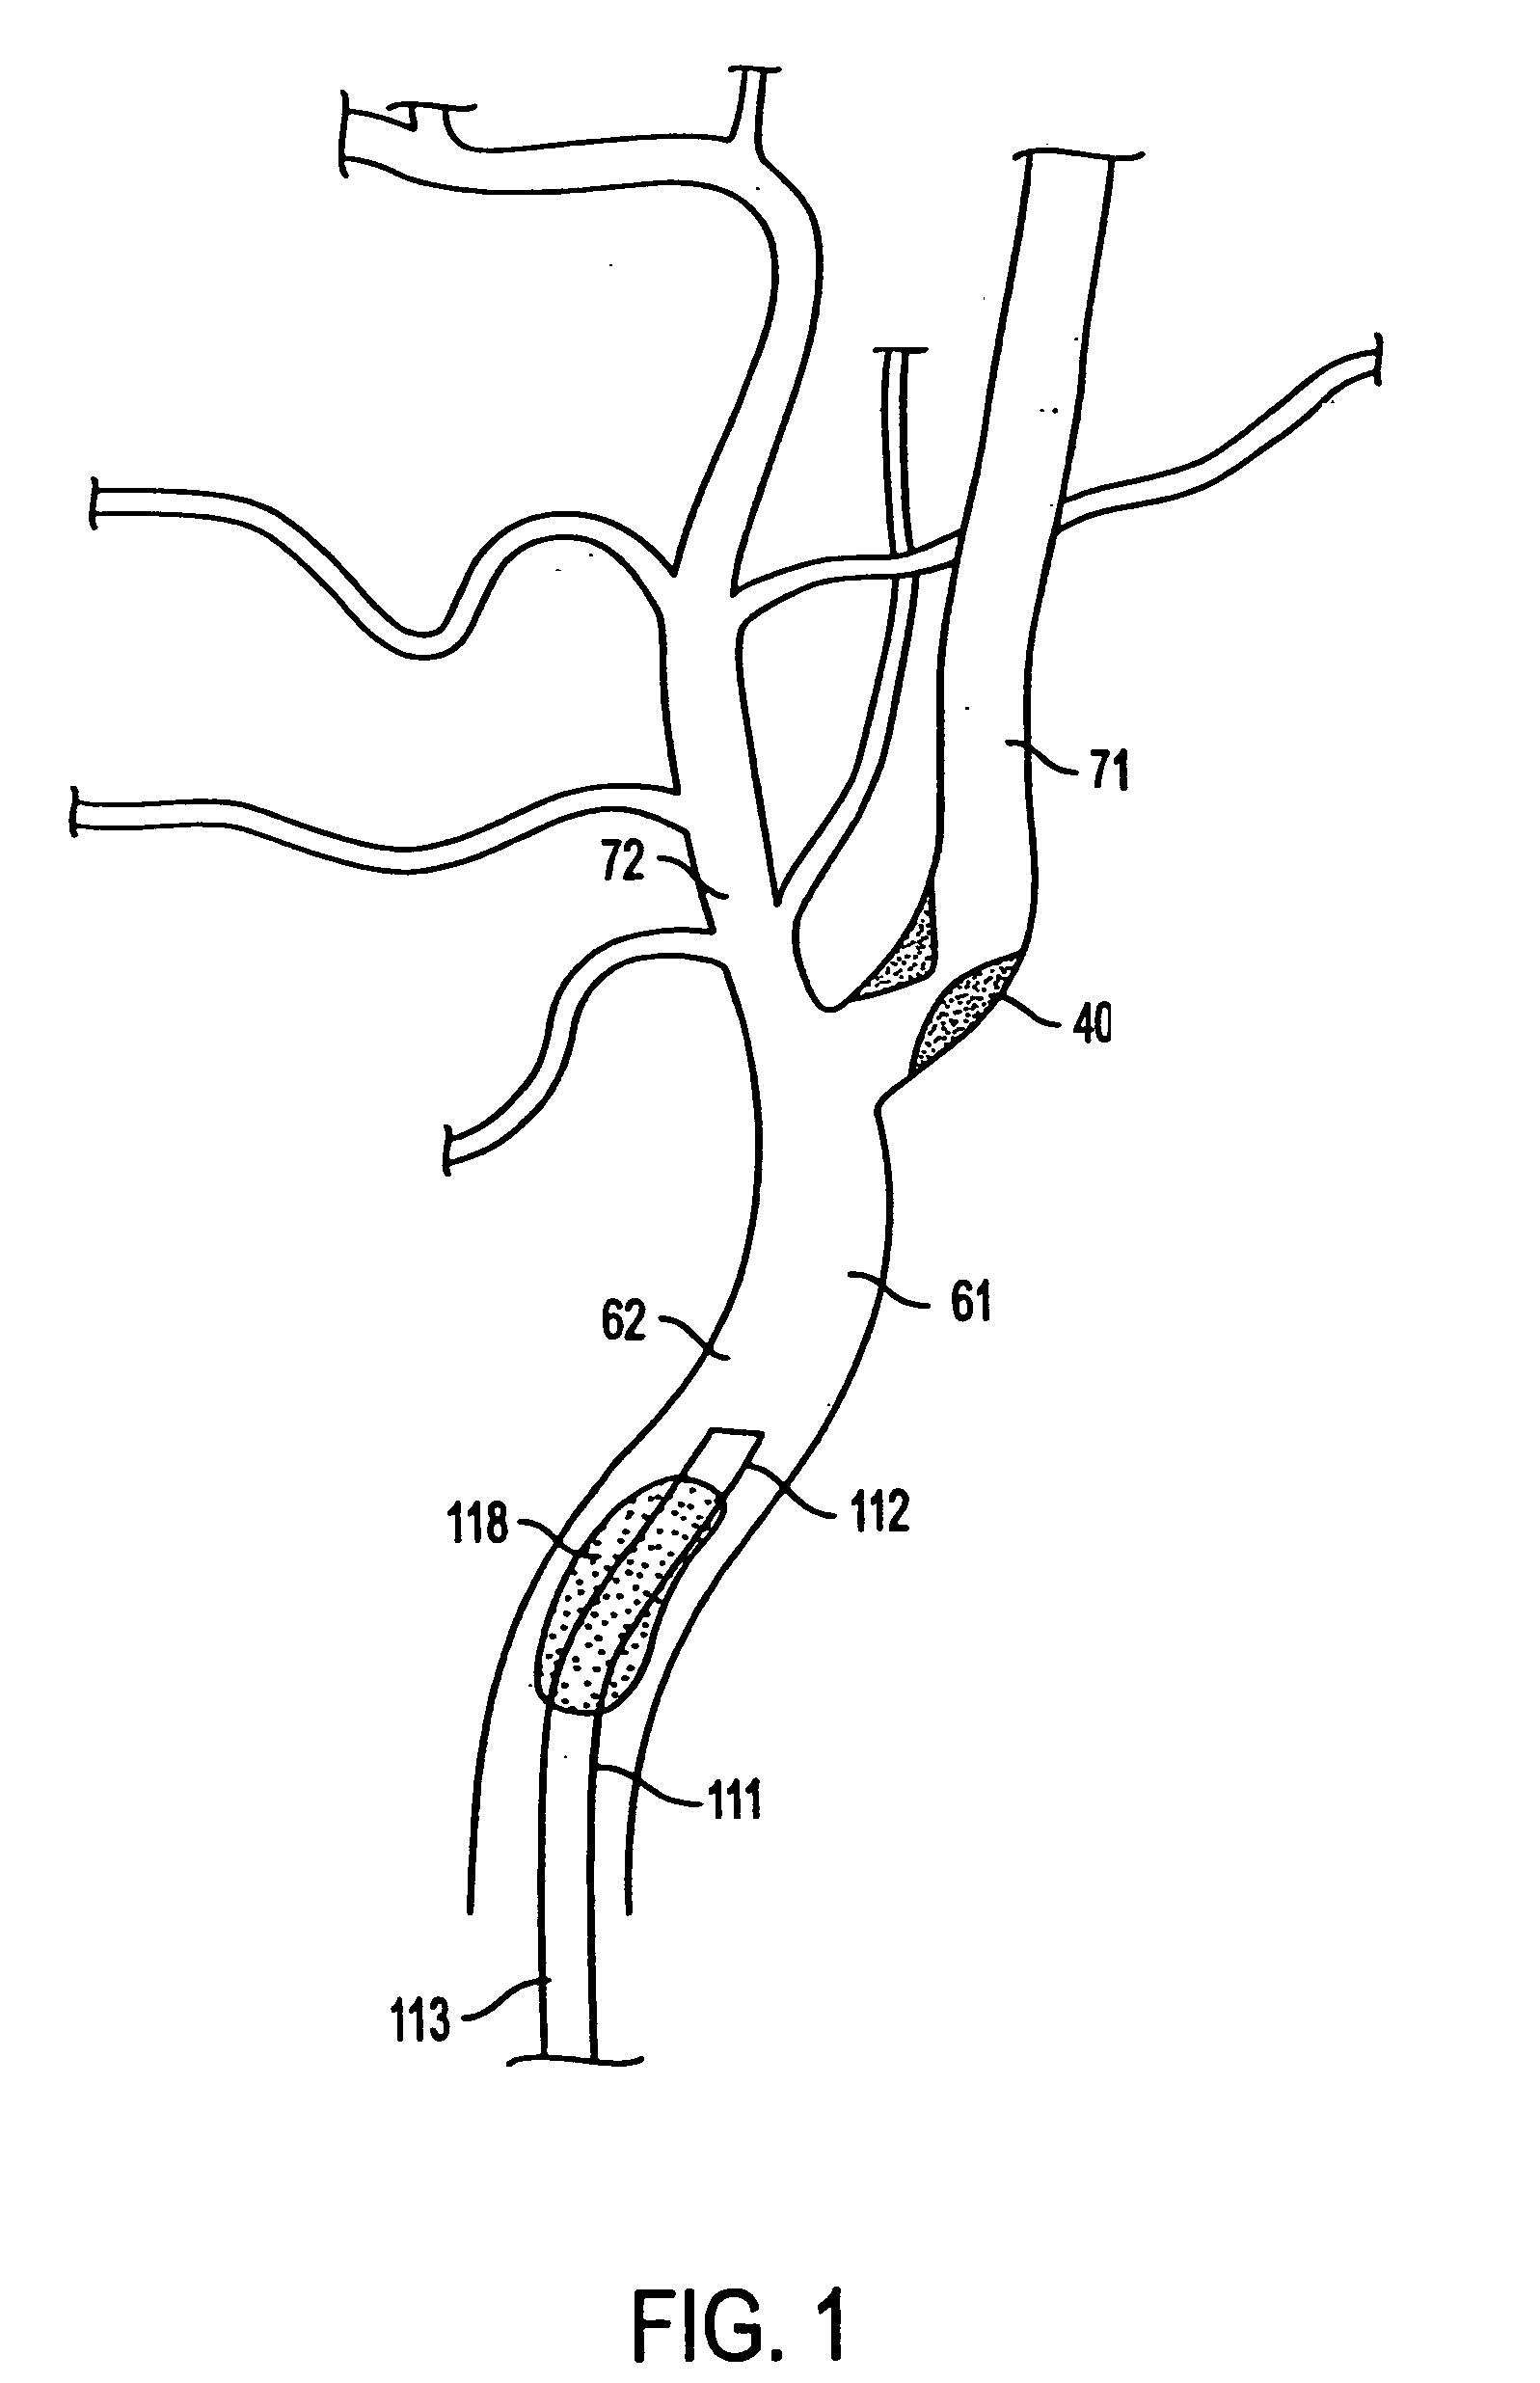 ICA angioplasty with cerebral protection